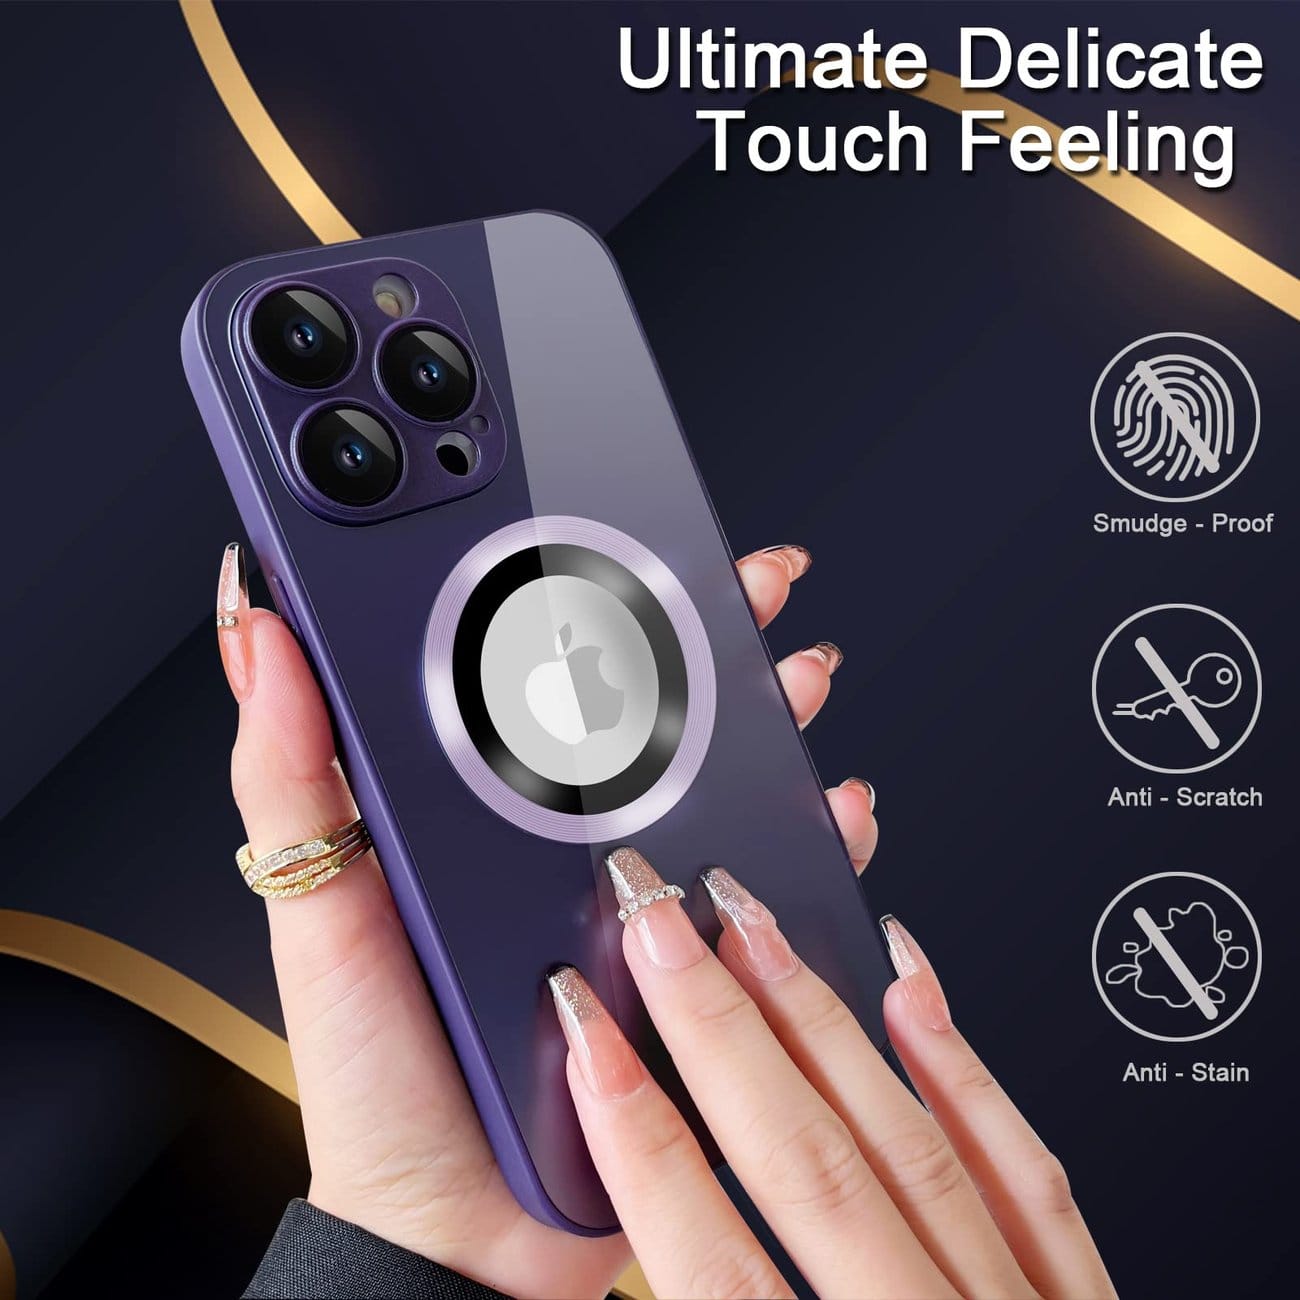 Magnetic AG Glass Frosted Case With Camera Lens Protector